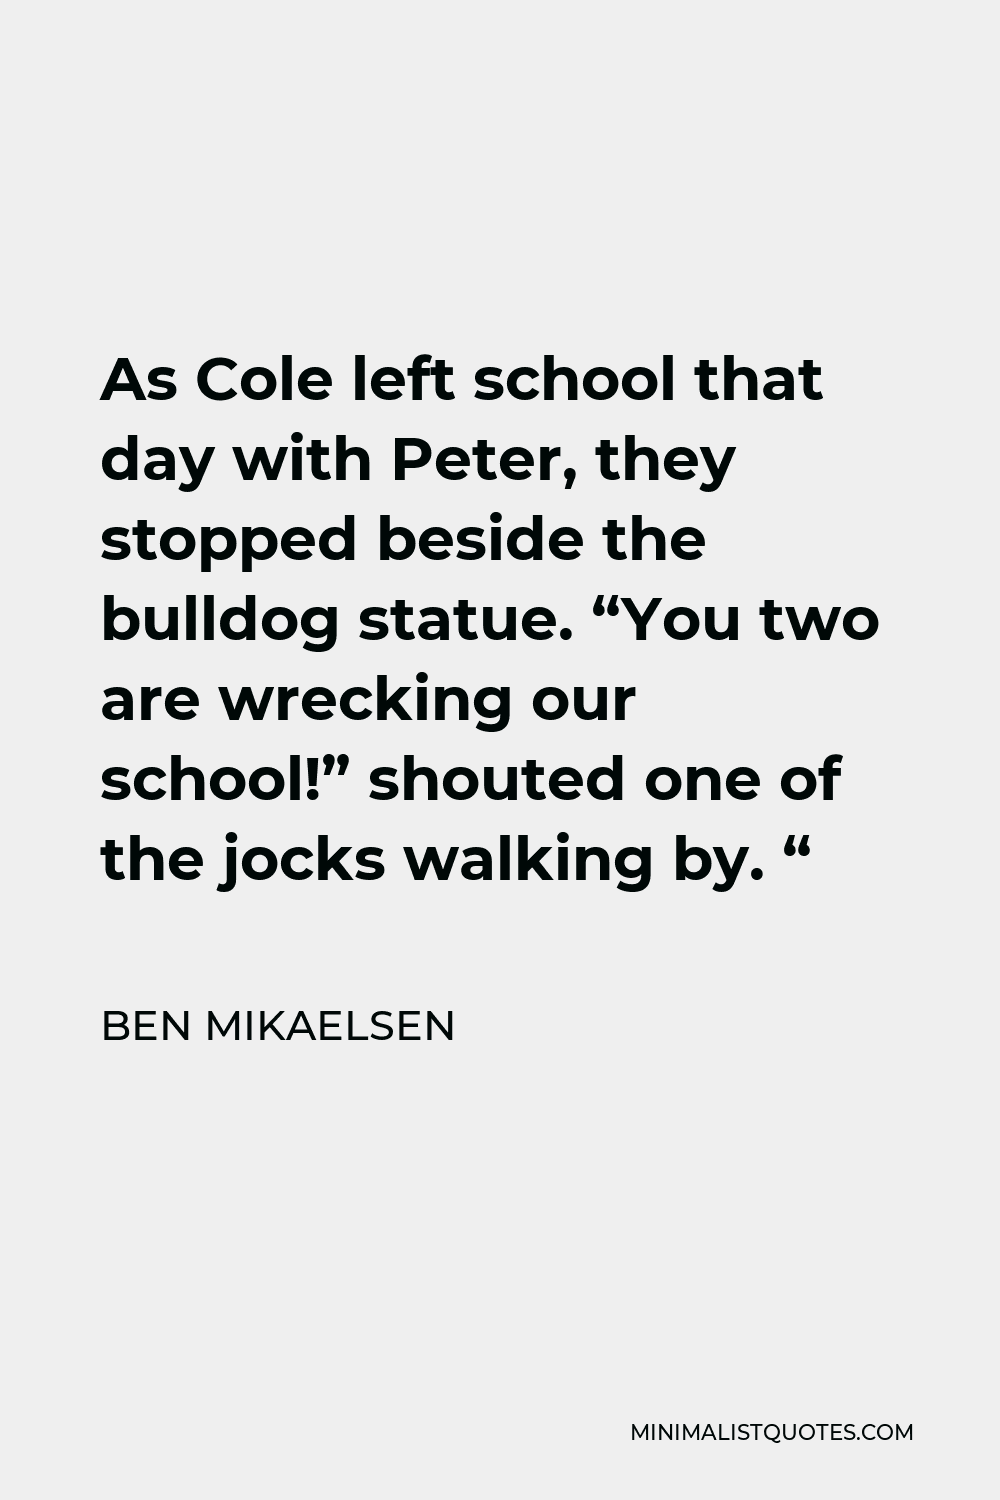 Ben Mikaelsen Quote - As Cole left school that day with Peter, they stopped beside the bulldog statue. “You two are wrecking our school!” shouted one of the jocks walking by. “